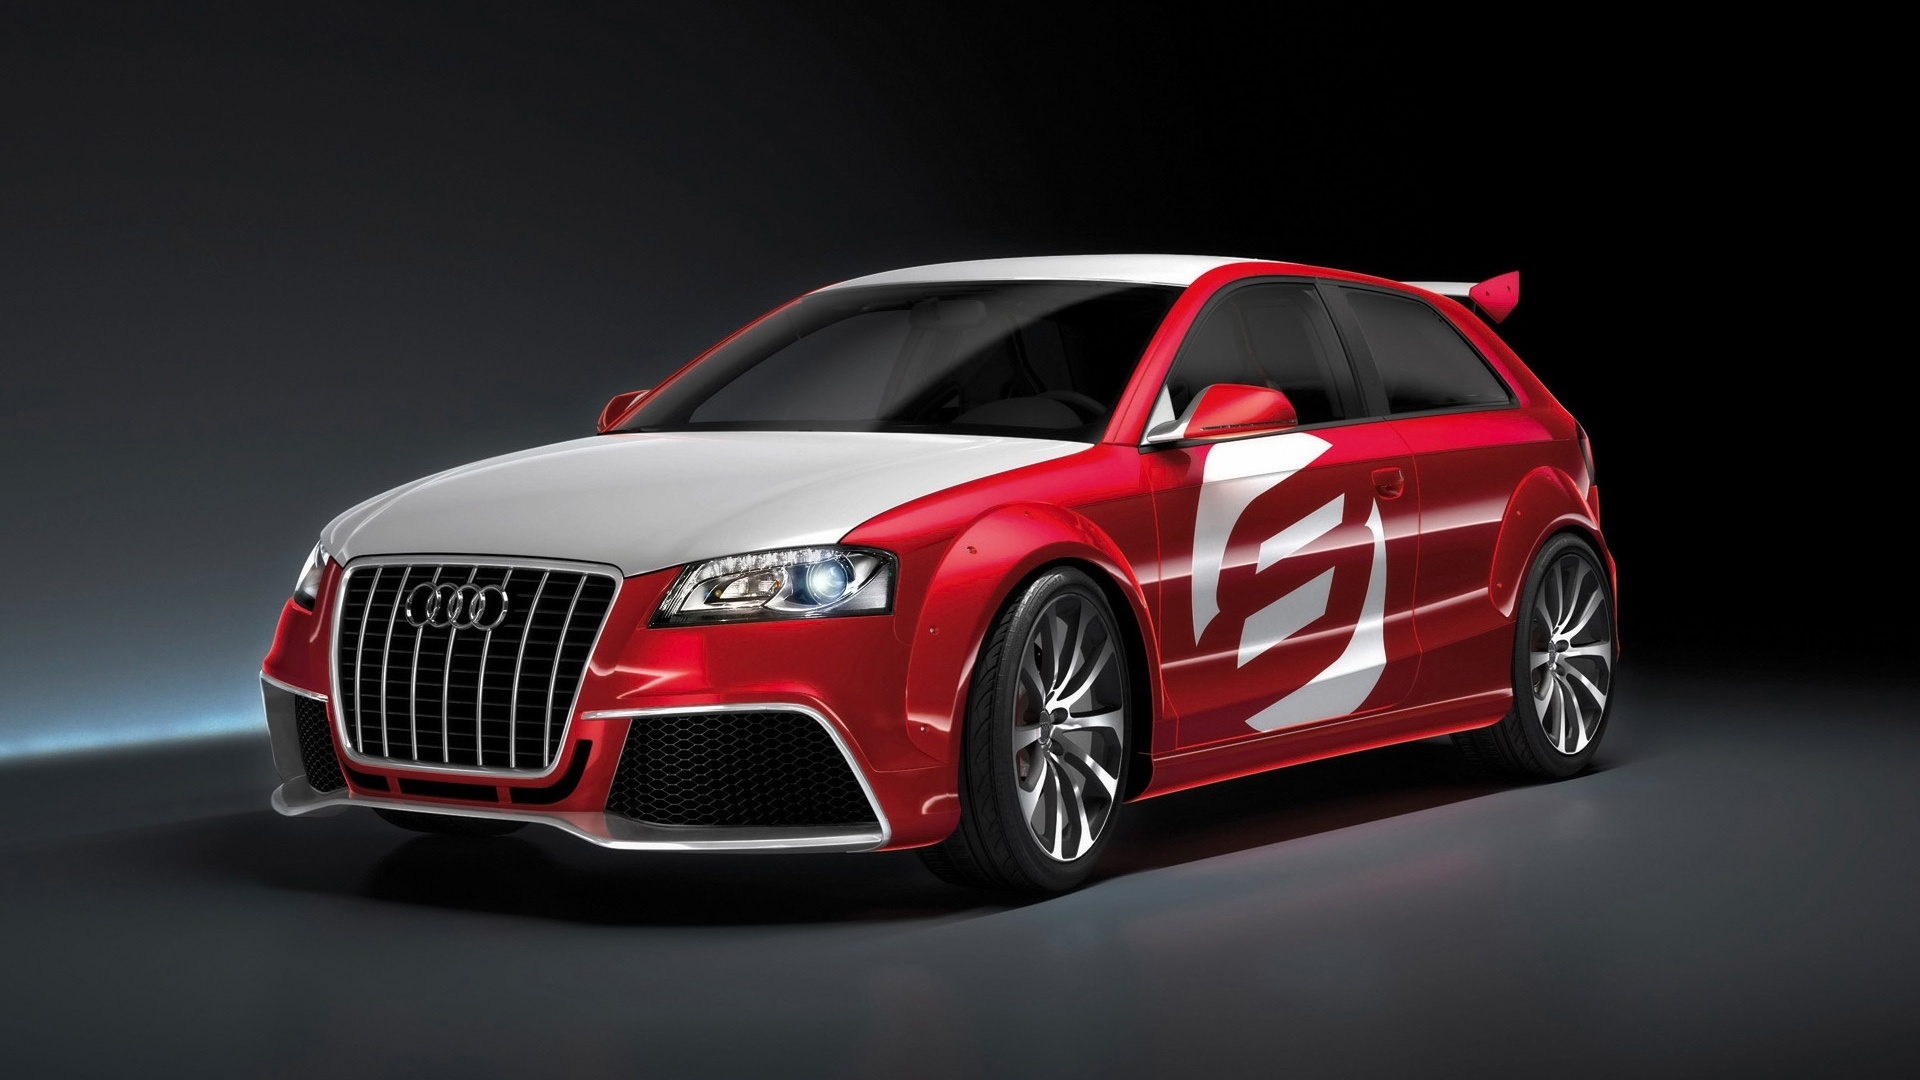 2008 Audi A3 TDI Clubsport Quattro - Front And Side for 1920 x 1080 HDTV 1080p resolution